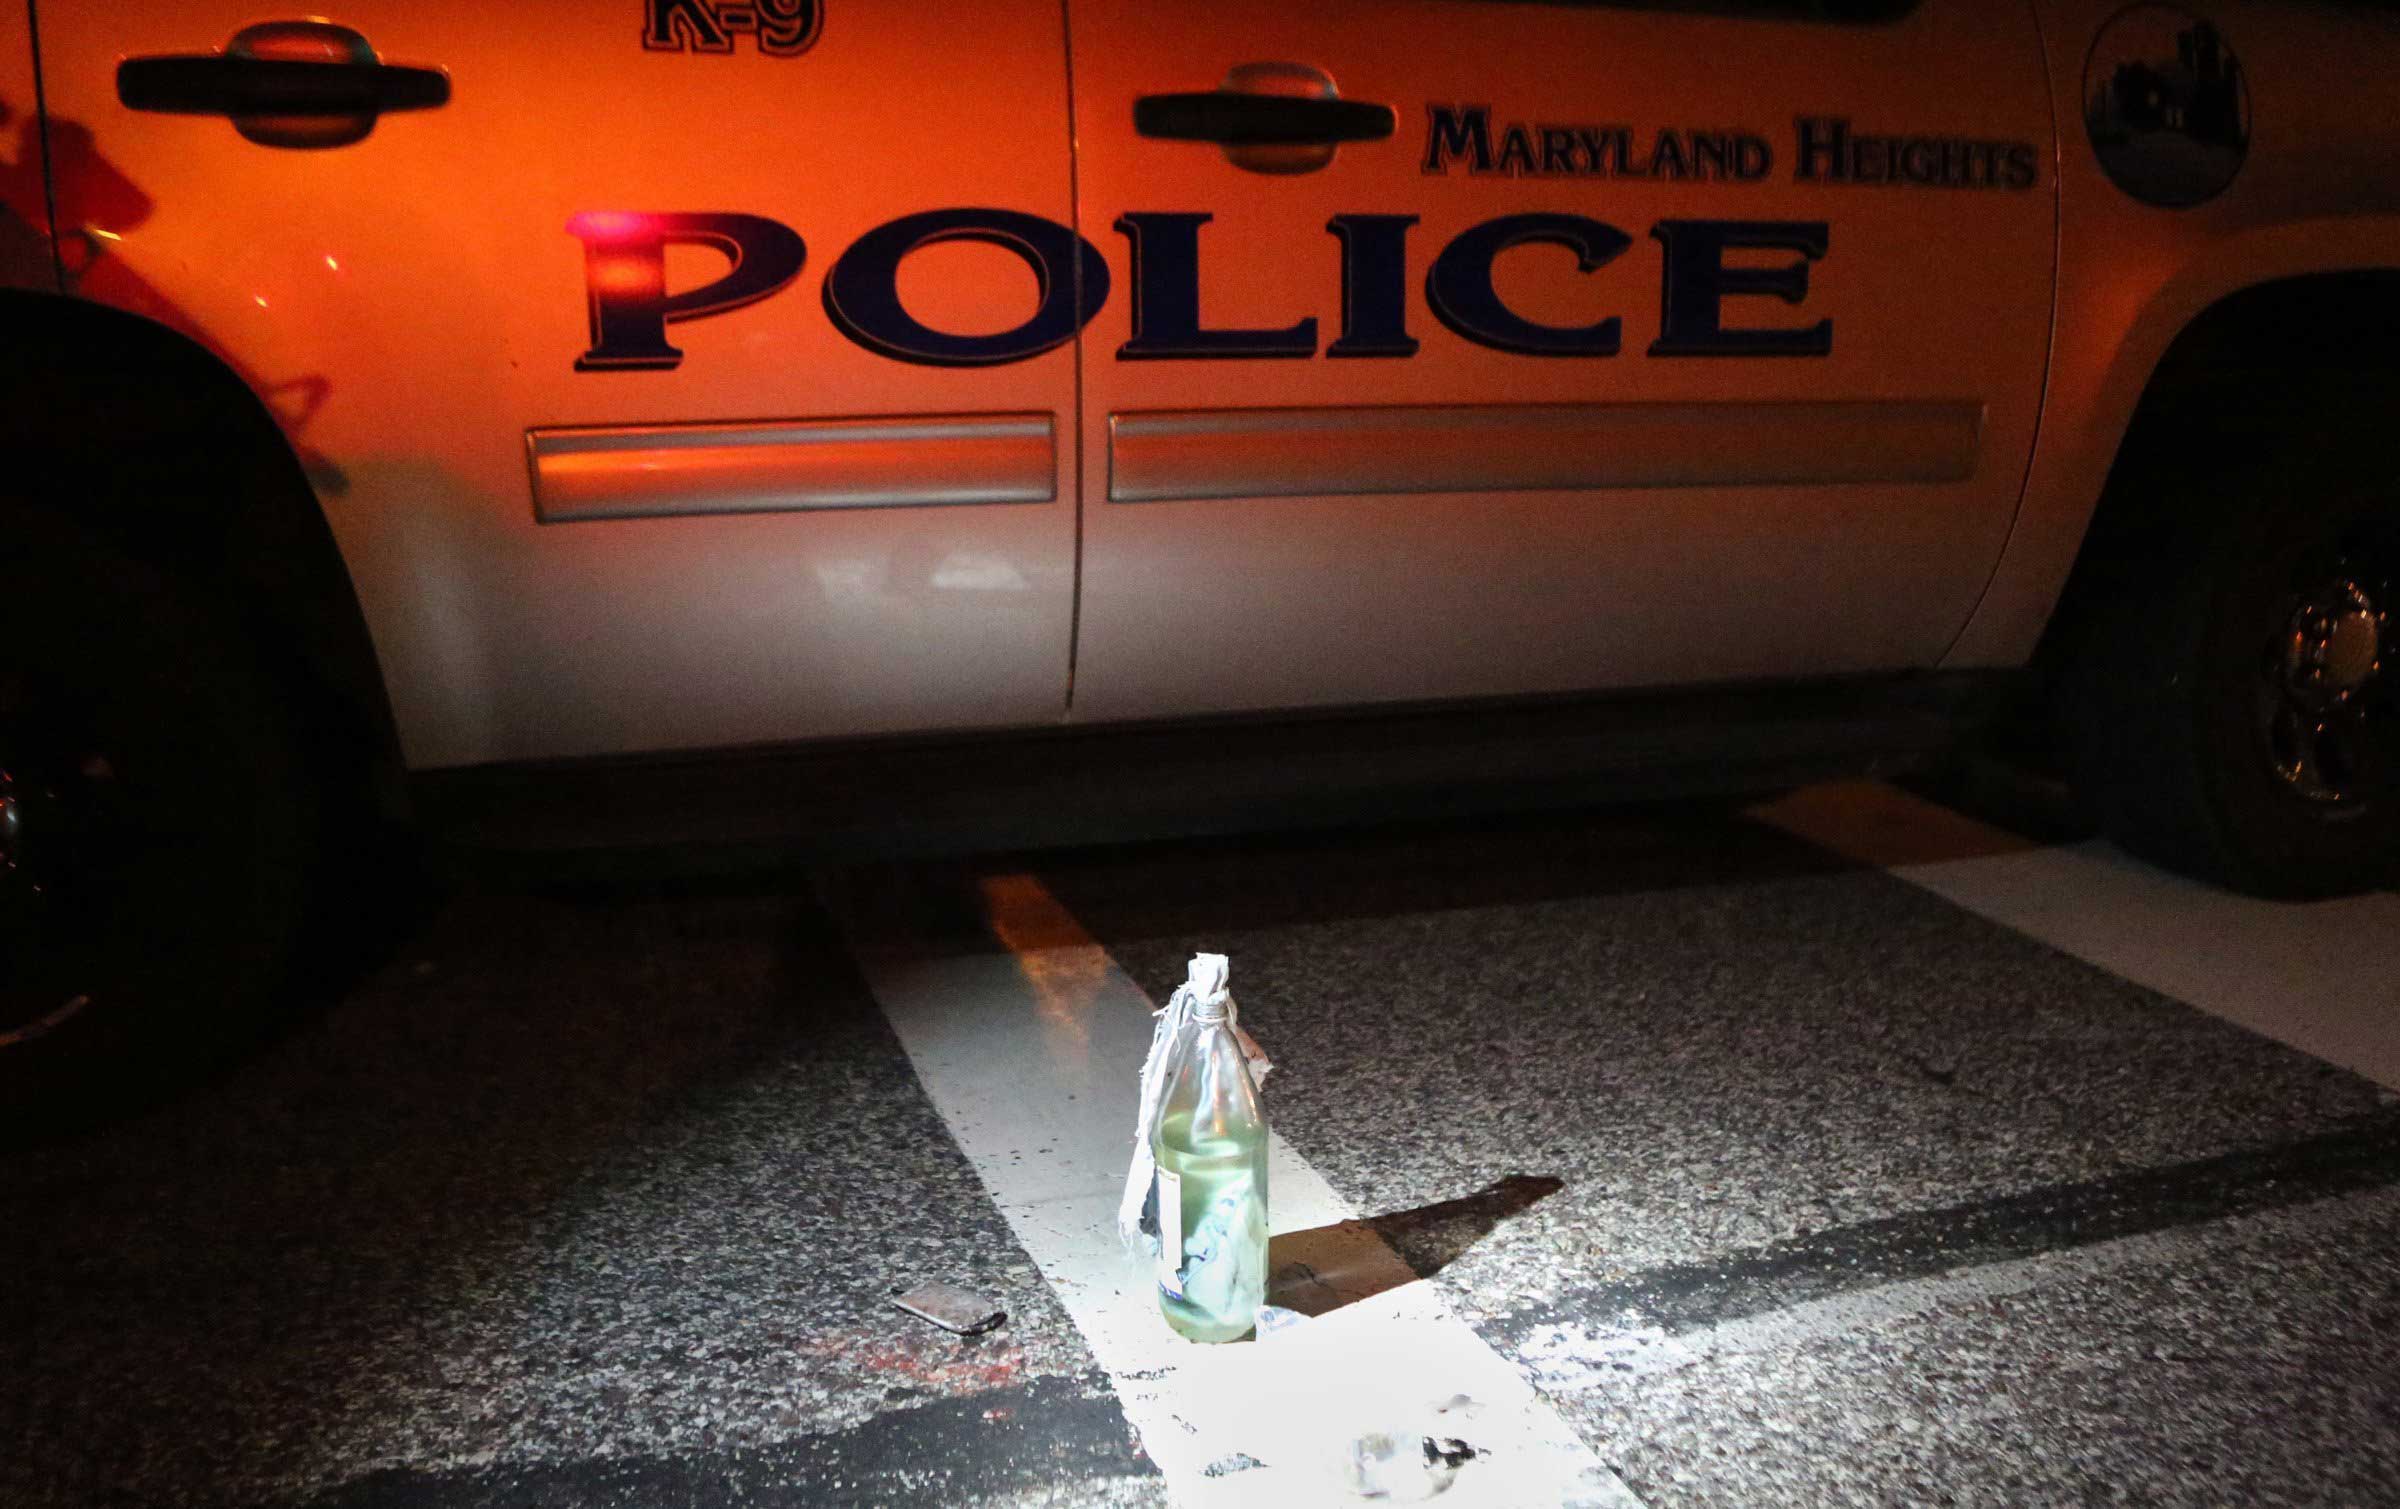 Aug. 19, 2014. A Molotov cocktail sits near a police car after it was removed from a truck carrying 12 people when it was stopped along W. Florissant Avenue near Canfield Drive. The police found two loaded guns on the people in the truck and removed an unused Molotov cocktail from the truck.